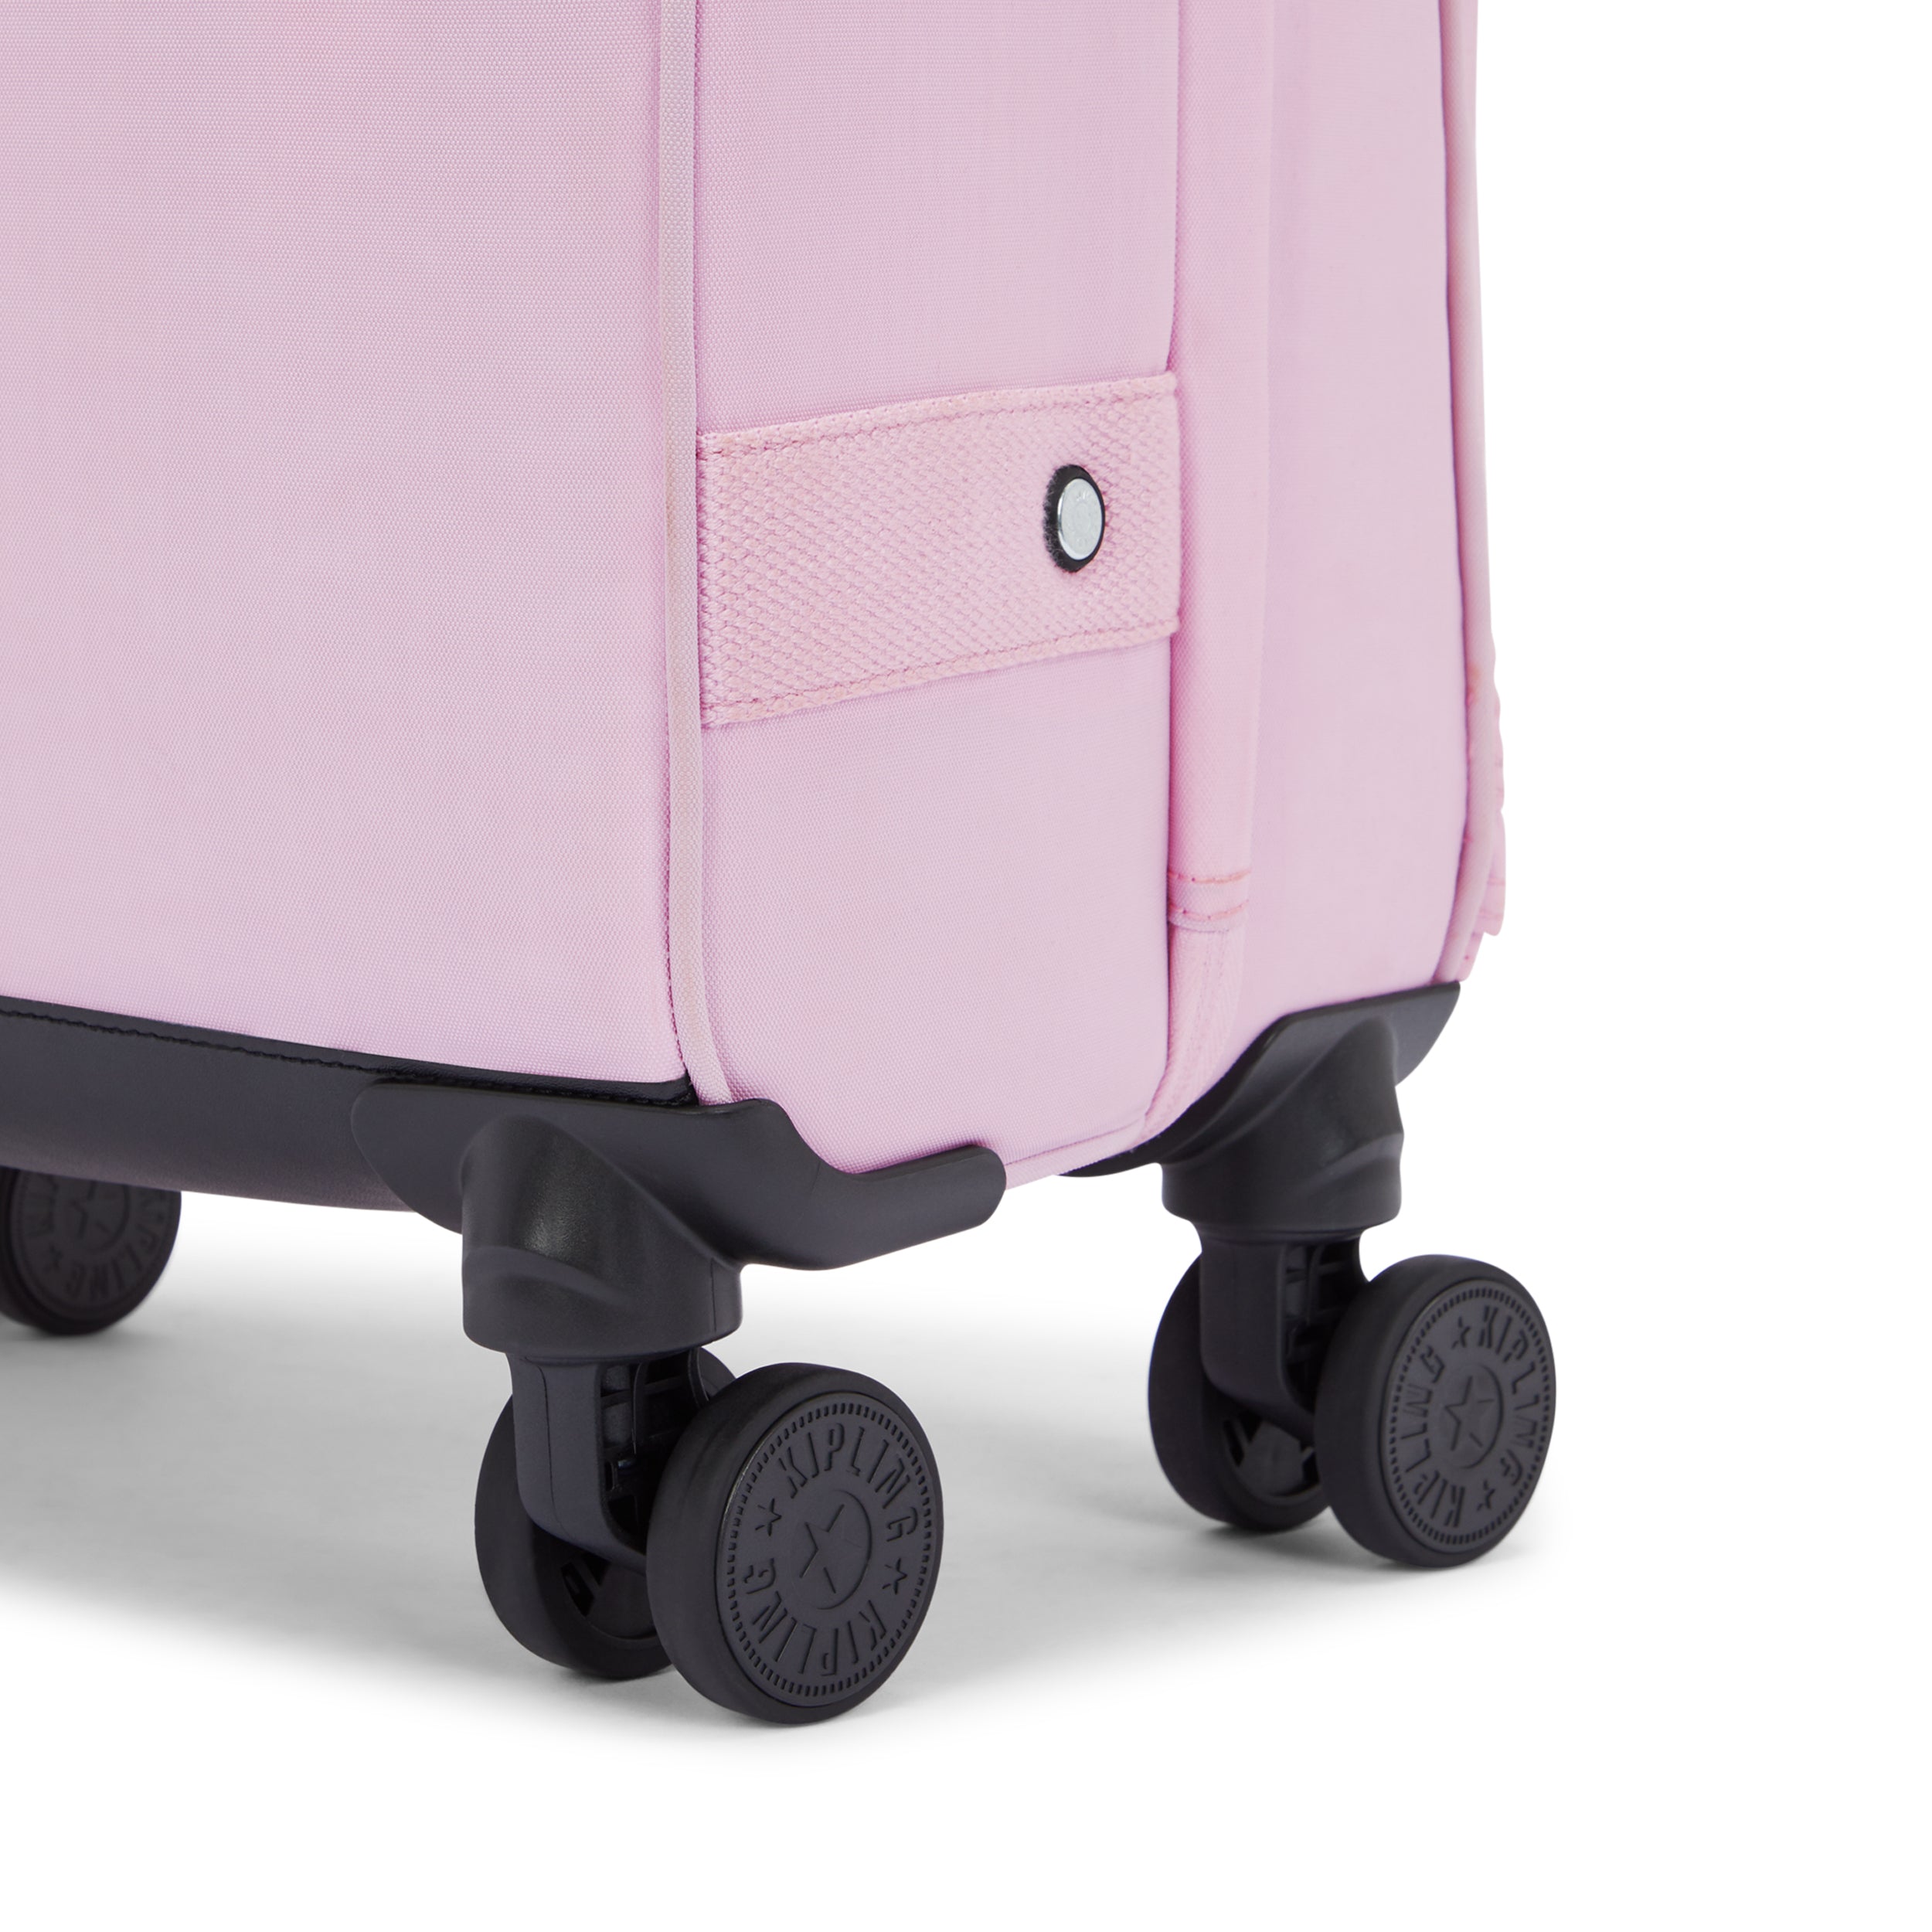 KIPLING-Spontaneous S-Small cabin size wheeled luggage-Blooming Pink-I5508-R2C